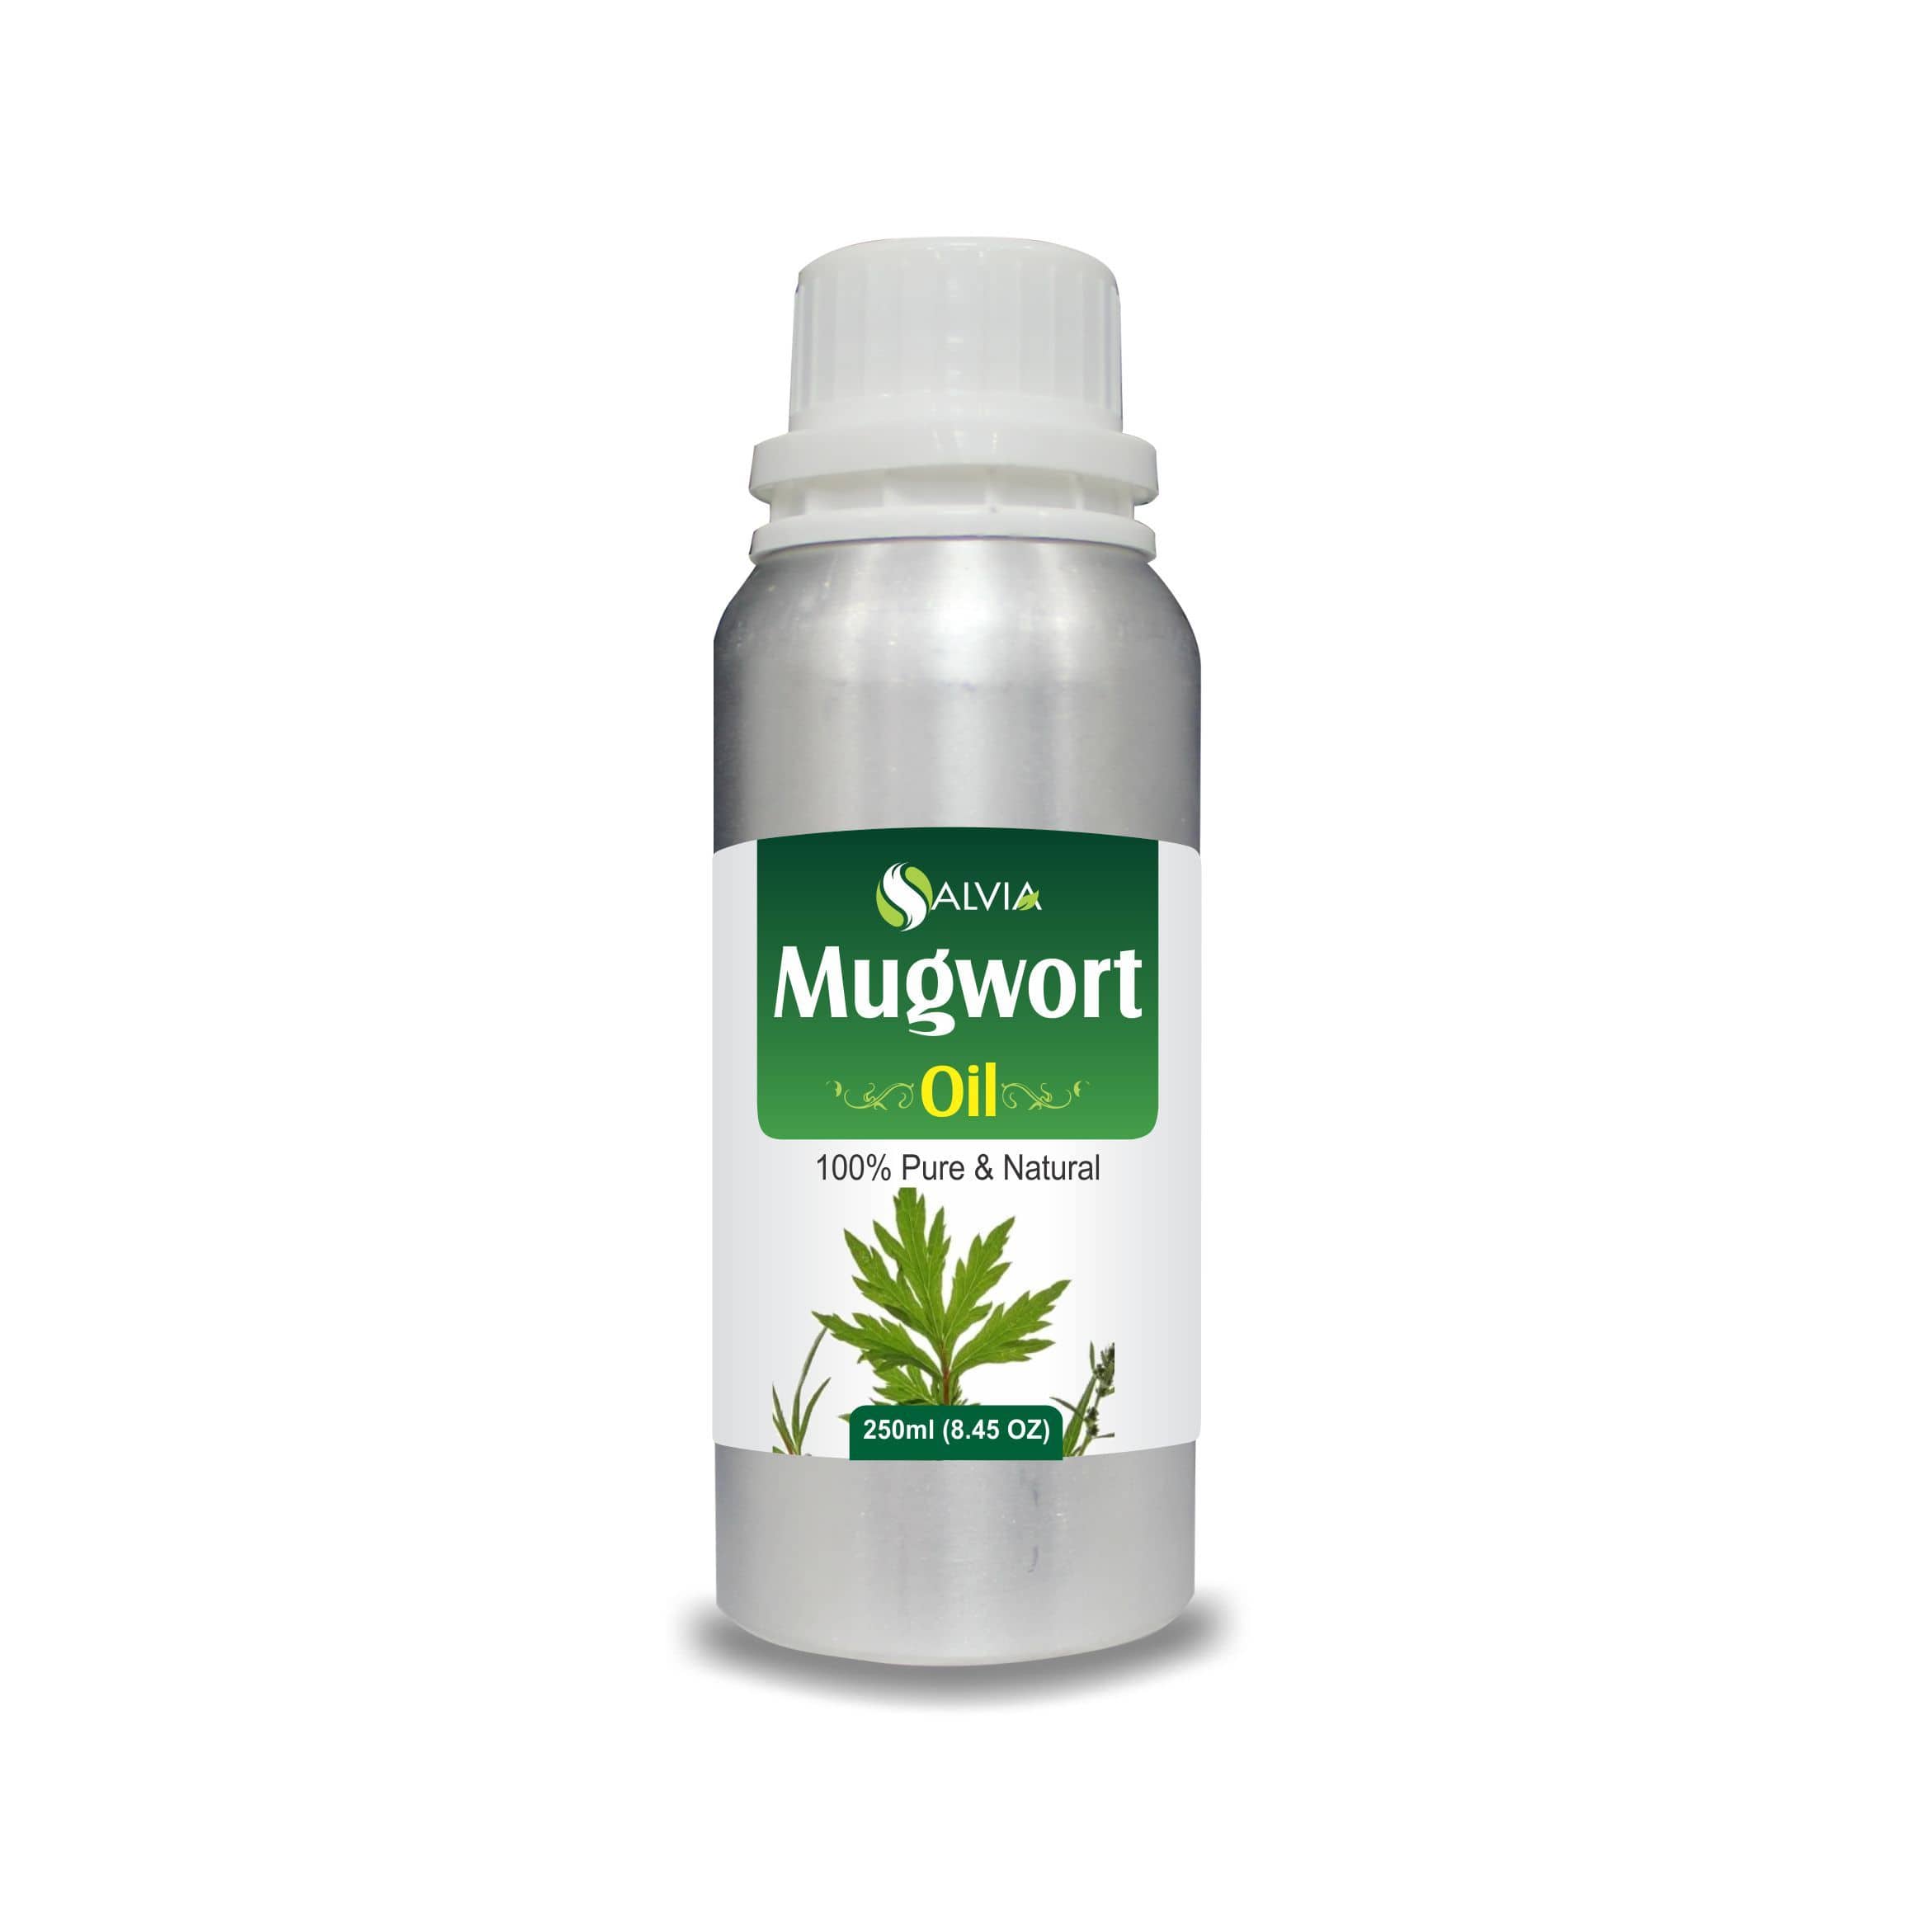 Salvia Natural Essential Oils 250ml Mugwort Oil (Artemisia-Vulgaris) 100% Natural Pure Essential Oil Protects, Nourishes & Hydrates The Skin, Anti-Aging Properties, Removes Excessive Oil in Scalp